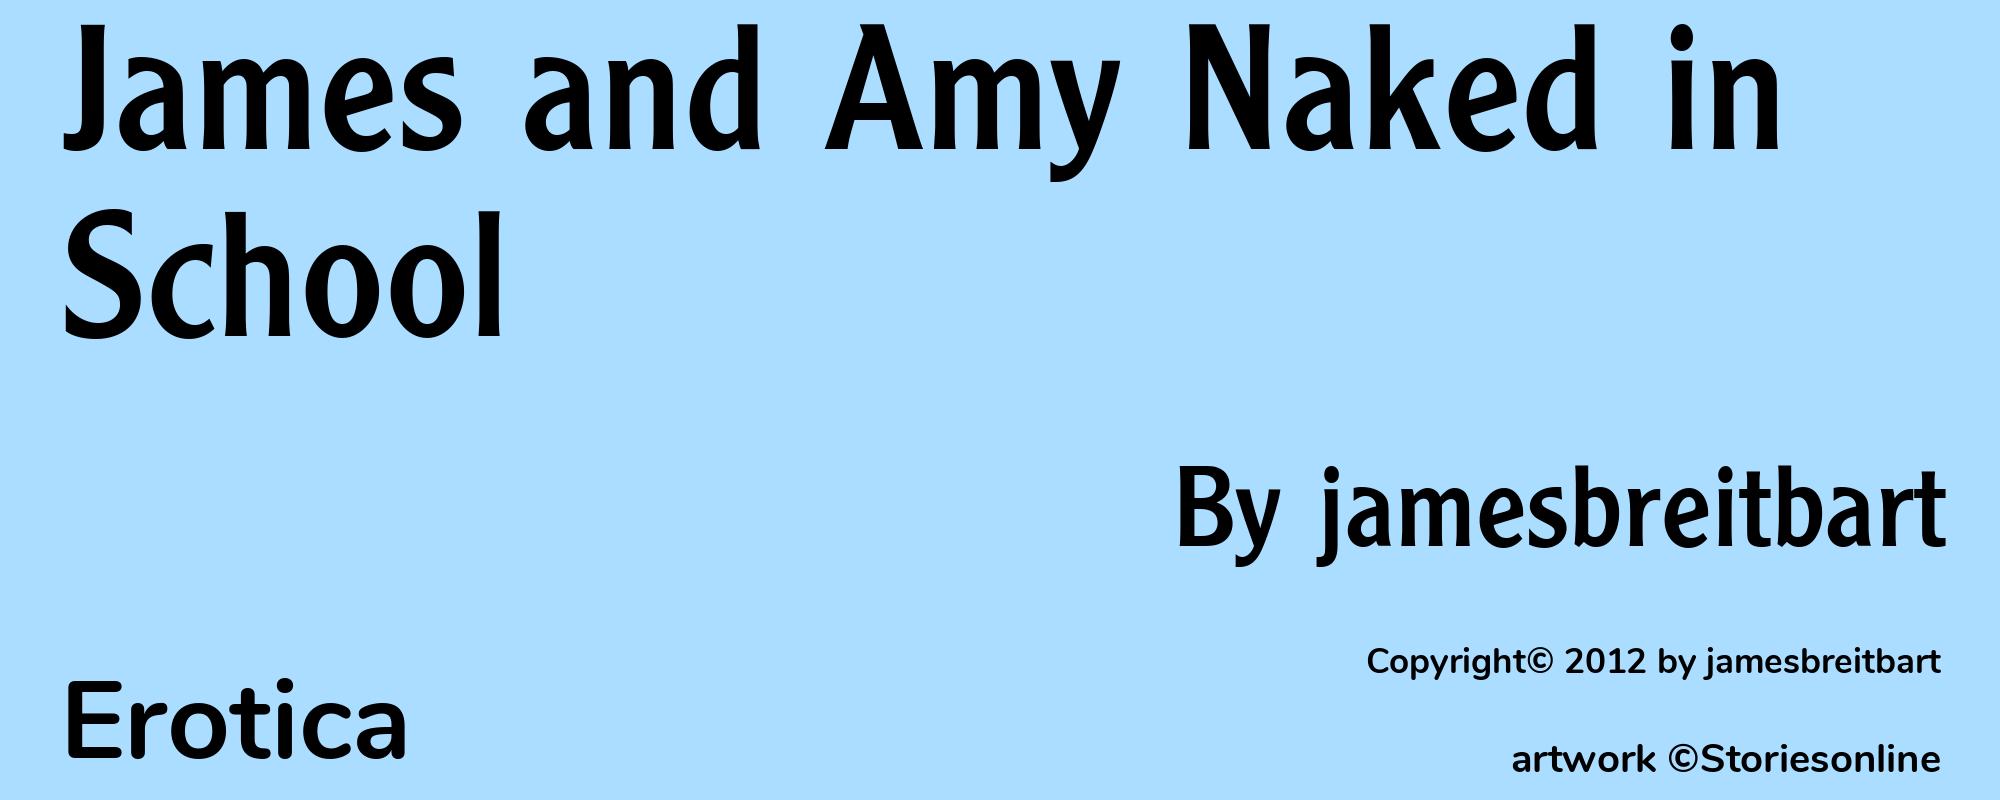 James and Amy Naked in School - Cover